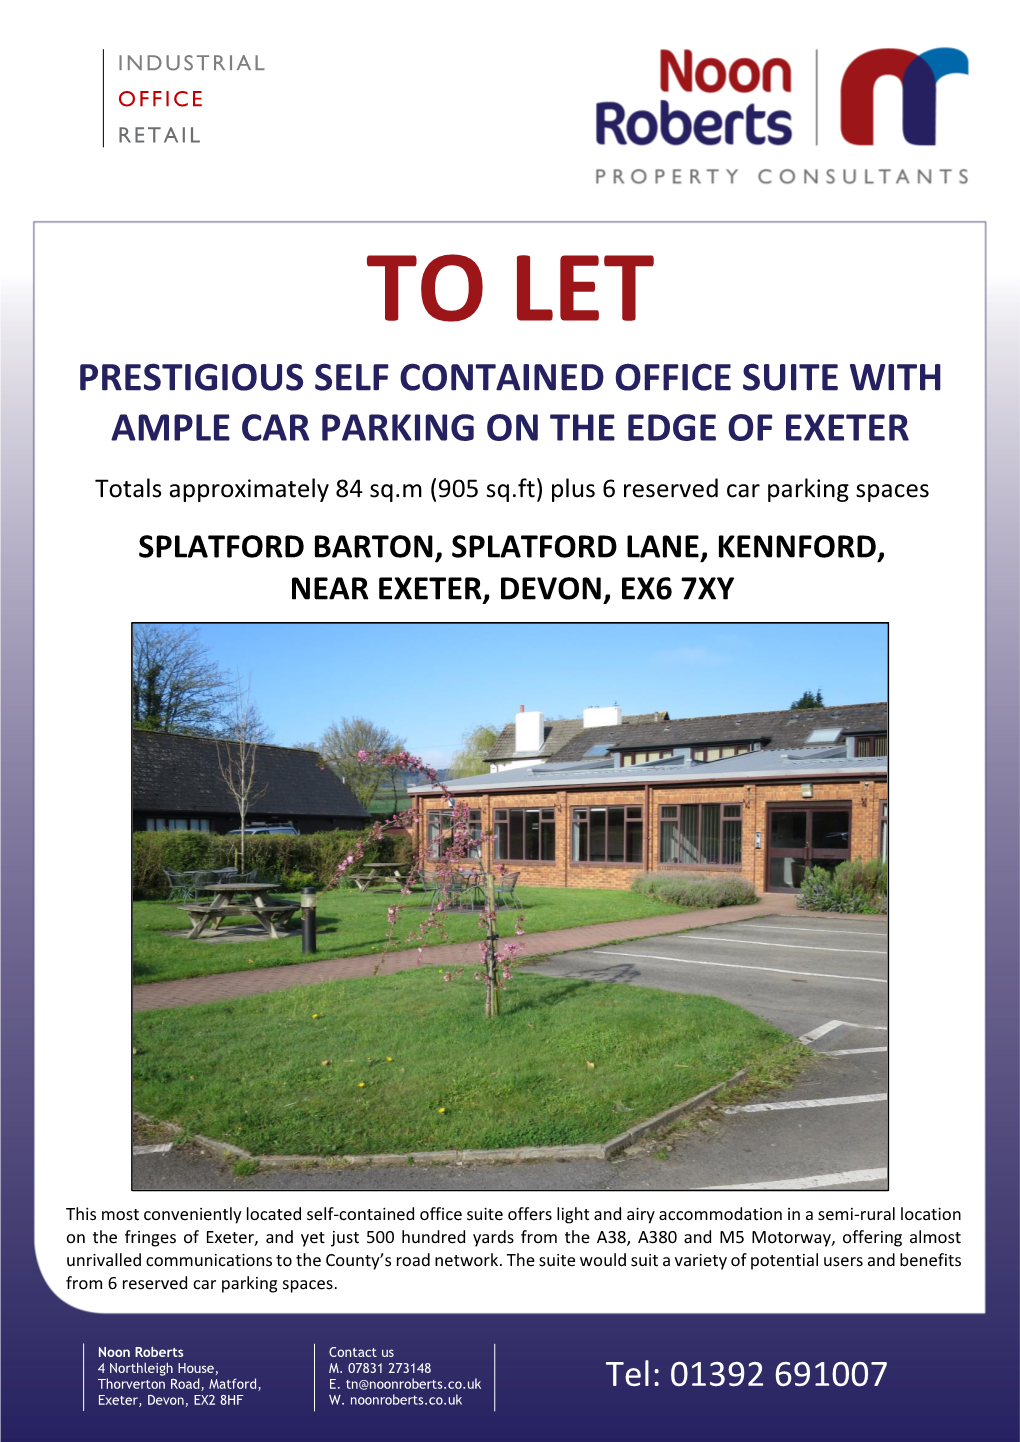 To Let Prestigious Self Contained Office Suite with Ample Car Parking on The